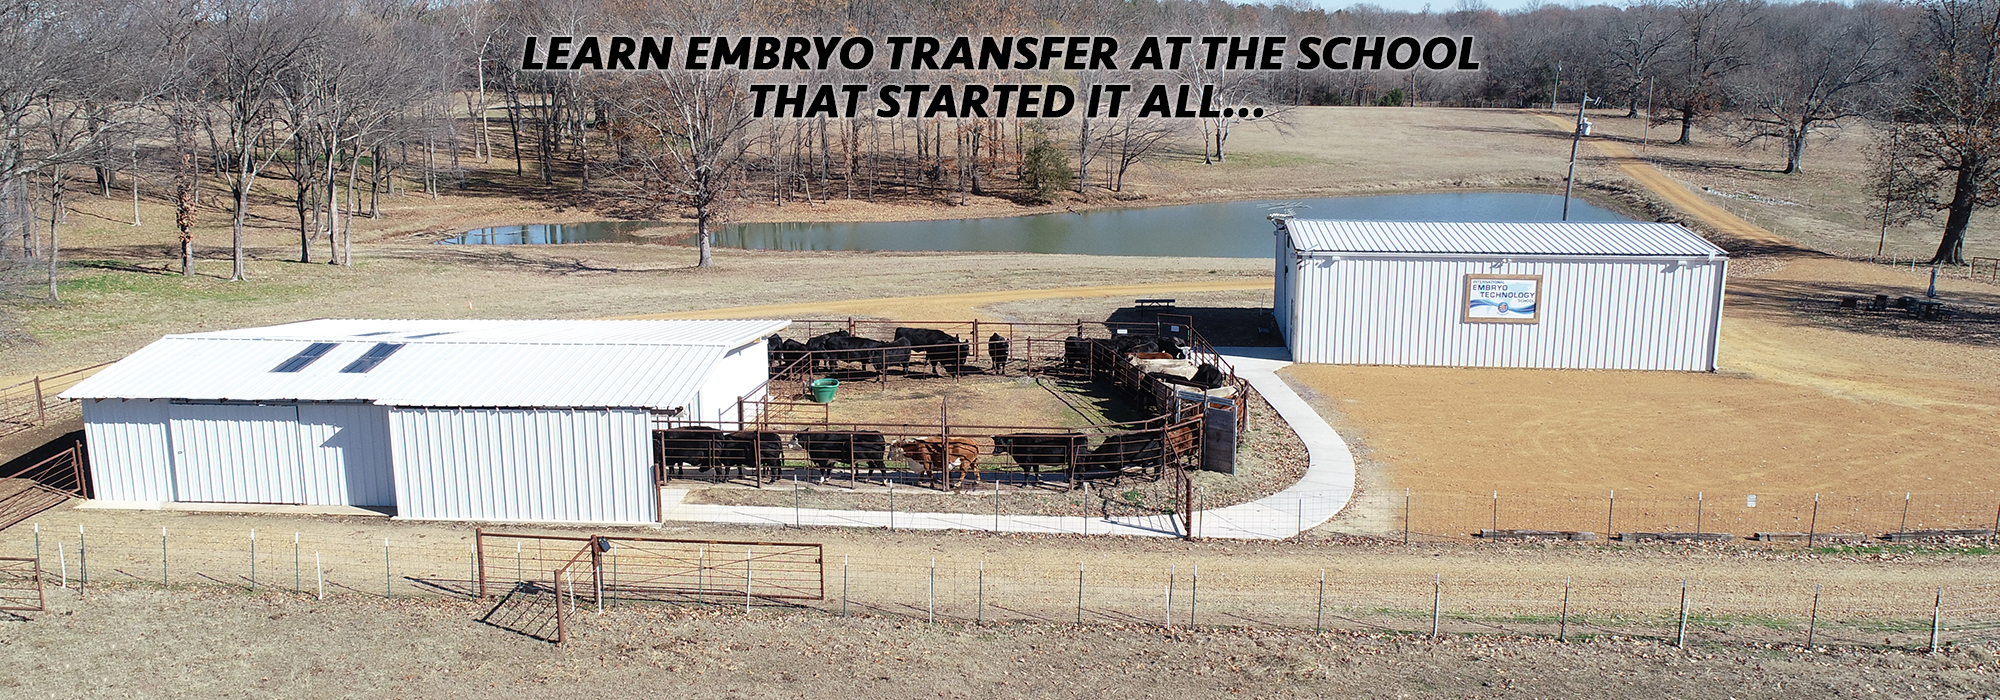 Learn Embryo Transfer at the School that Started It All...